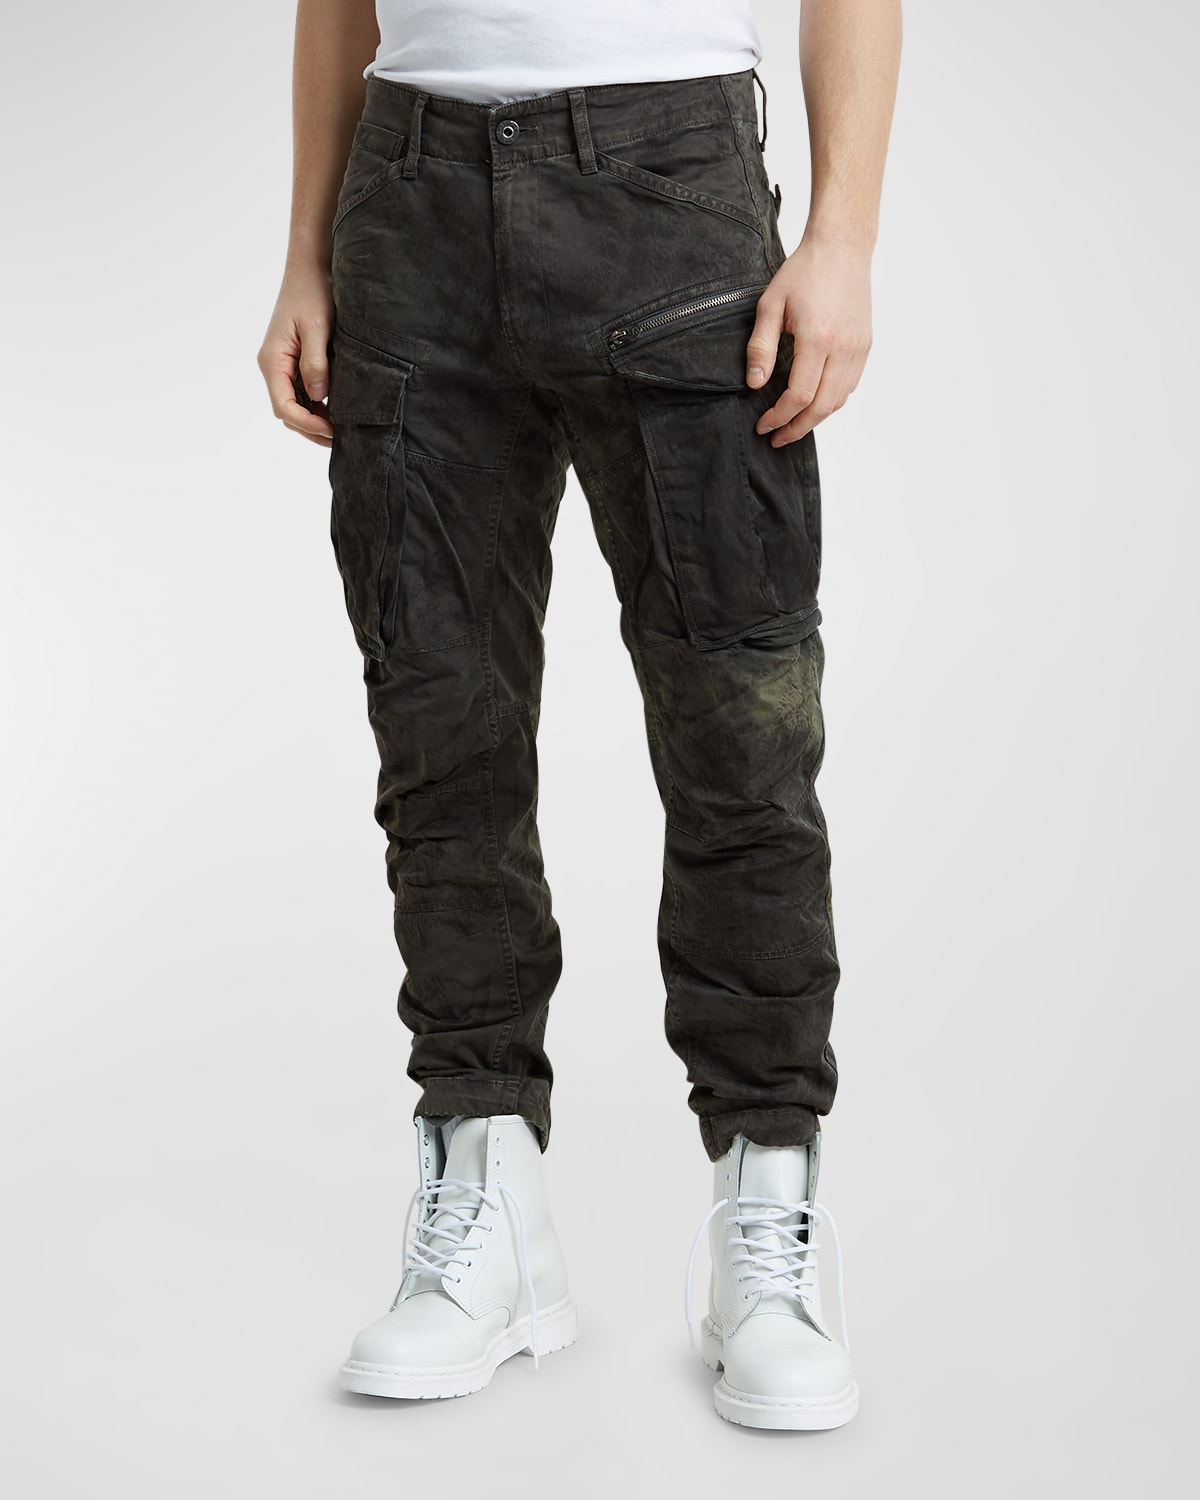 Men's Rovic Upcycled 3D Pants